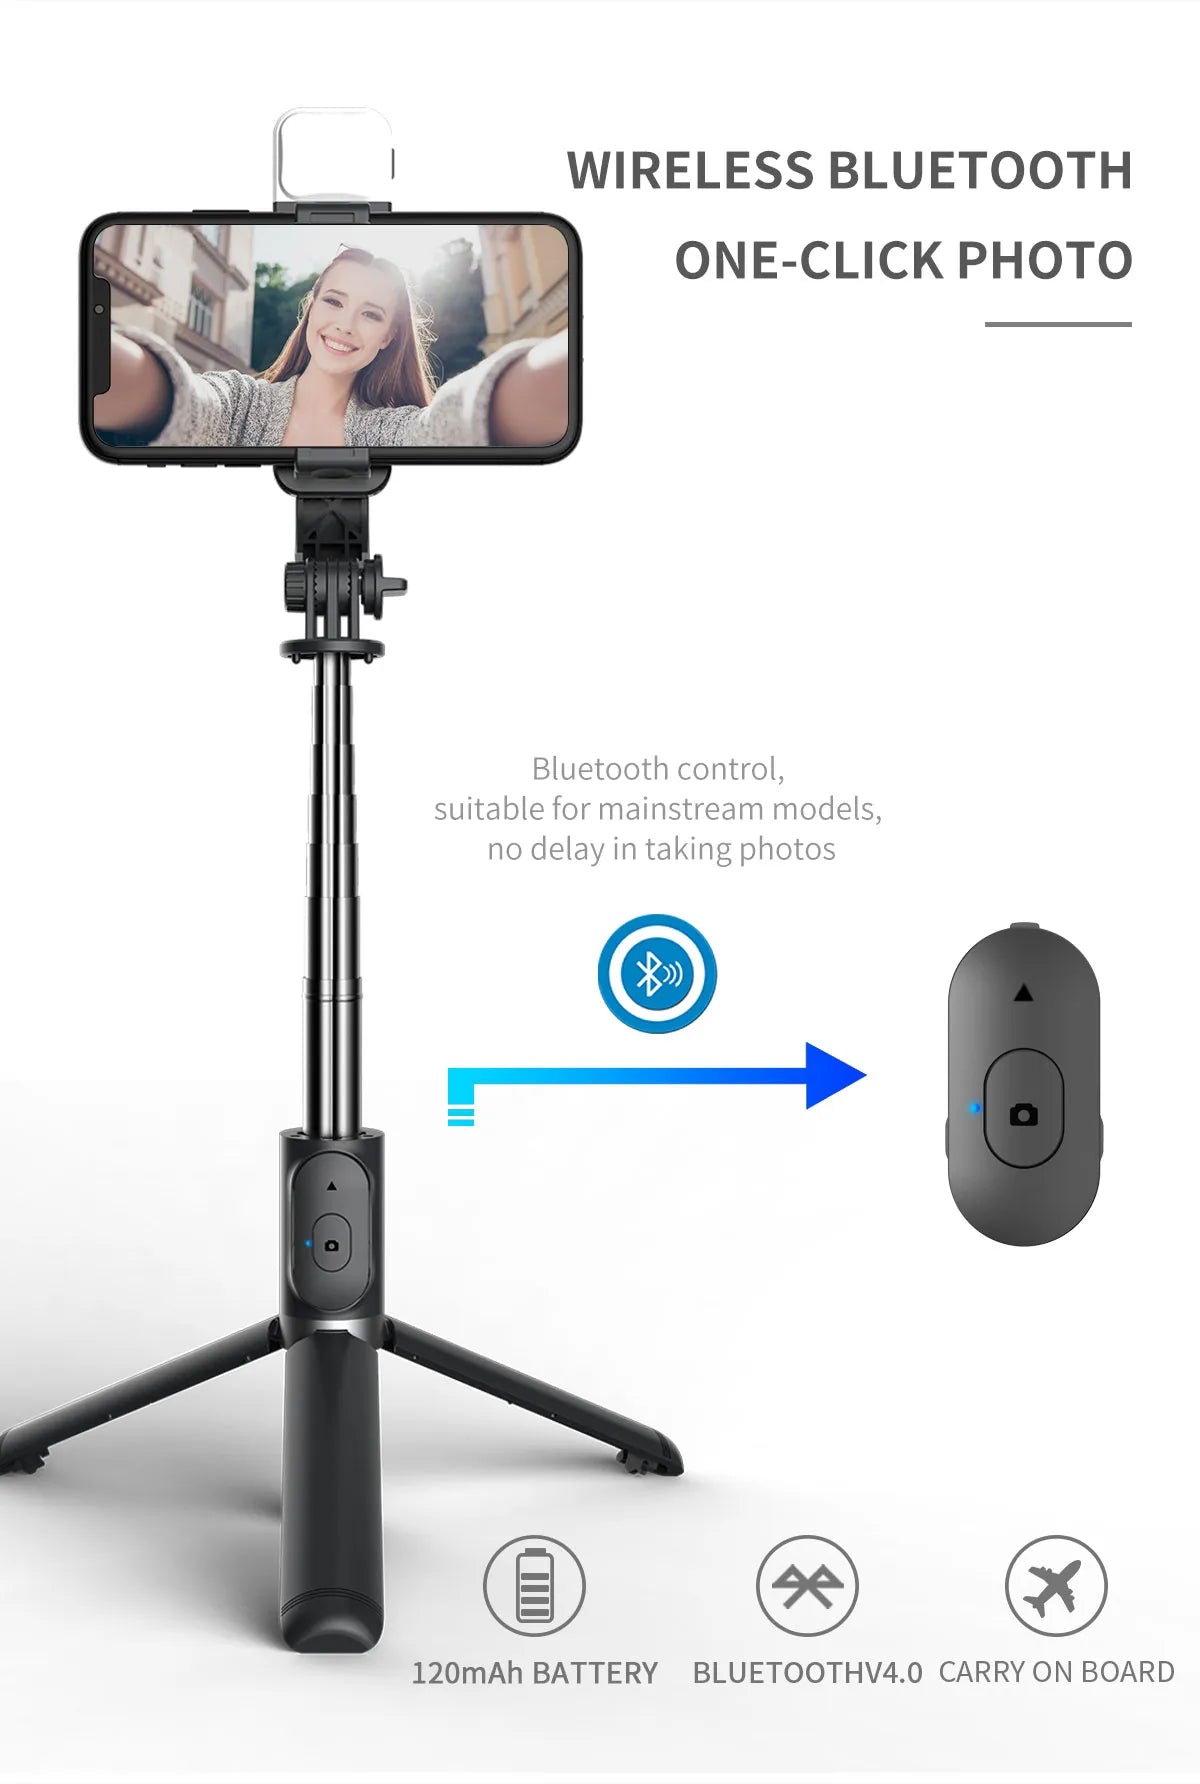 Foldable Bluetooth Selfie Stick Tripod for Samsung, Huawei, Xiaomi, iPhone - Capture Perfect Shots Anywhere